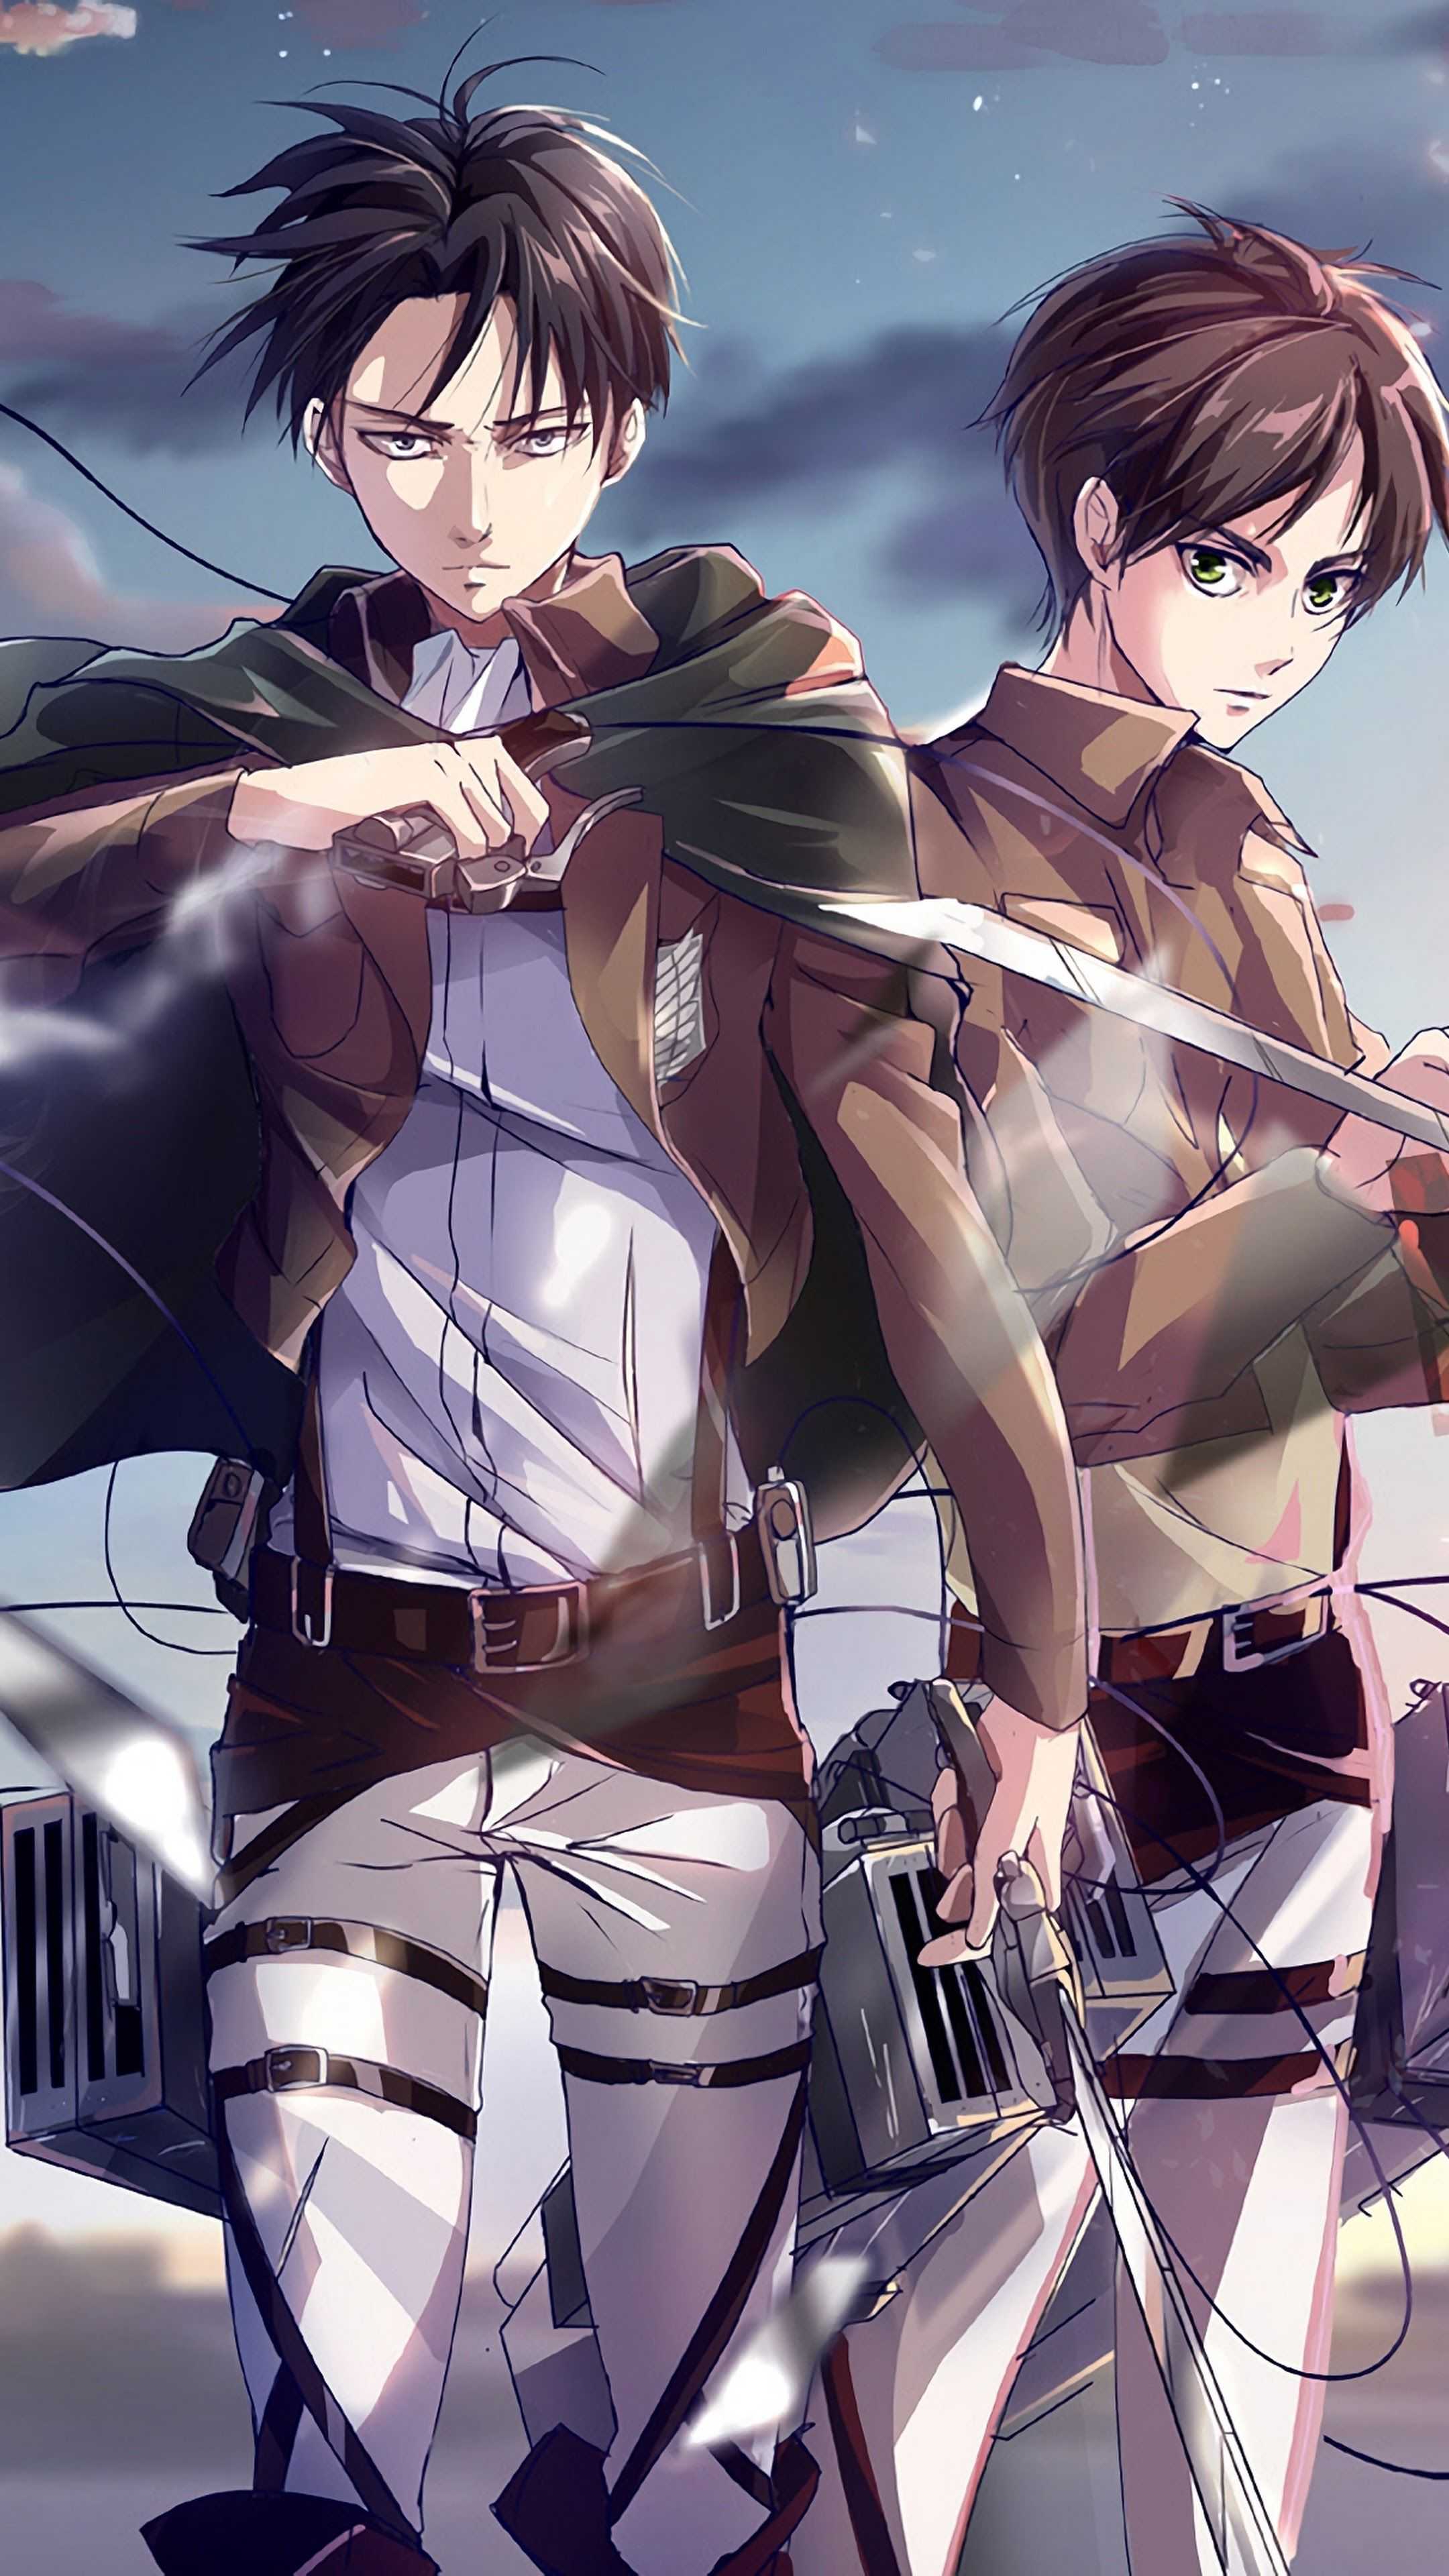 18 Eren Yeager Wallpapers for iPhone and Android by Brandy Garner